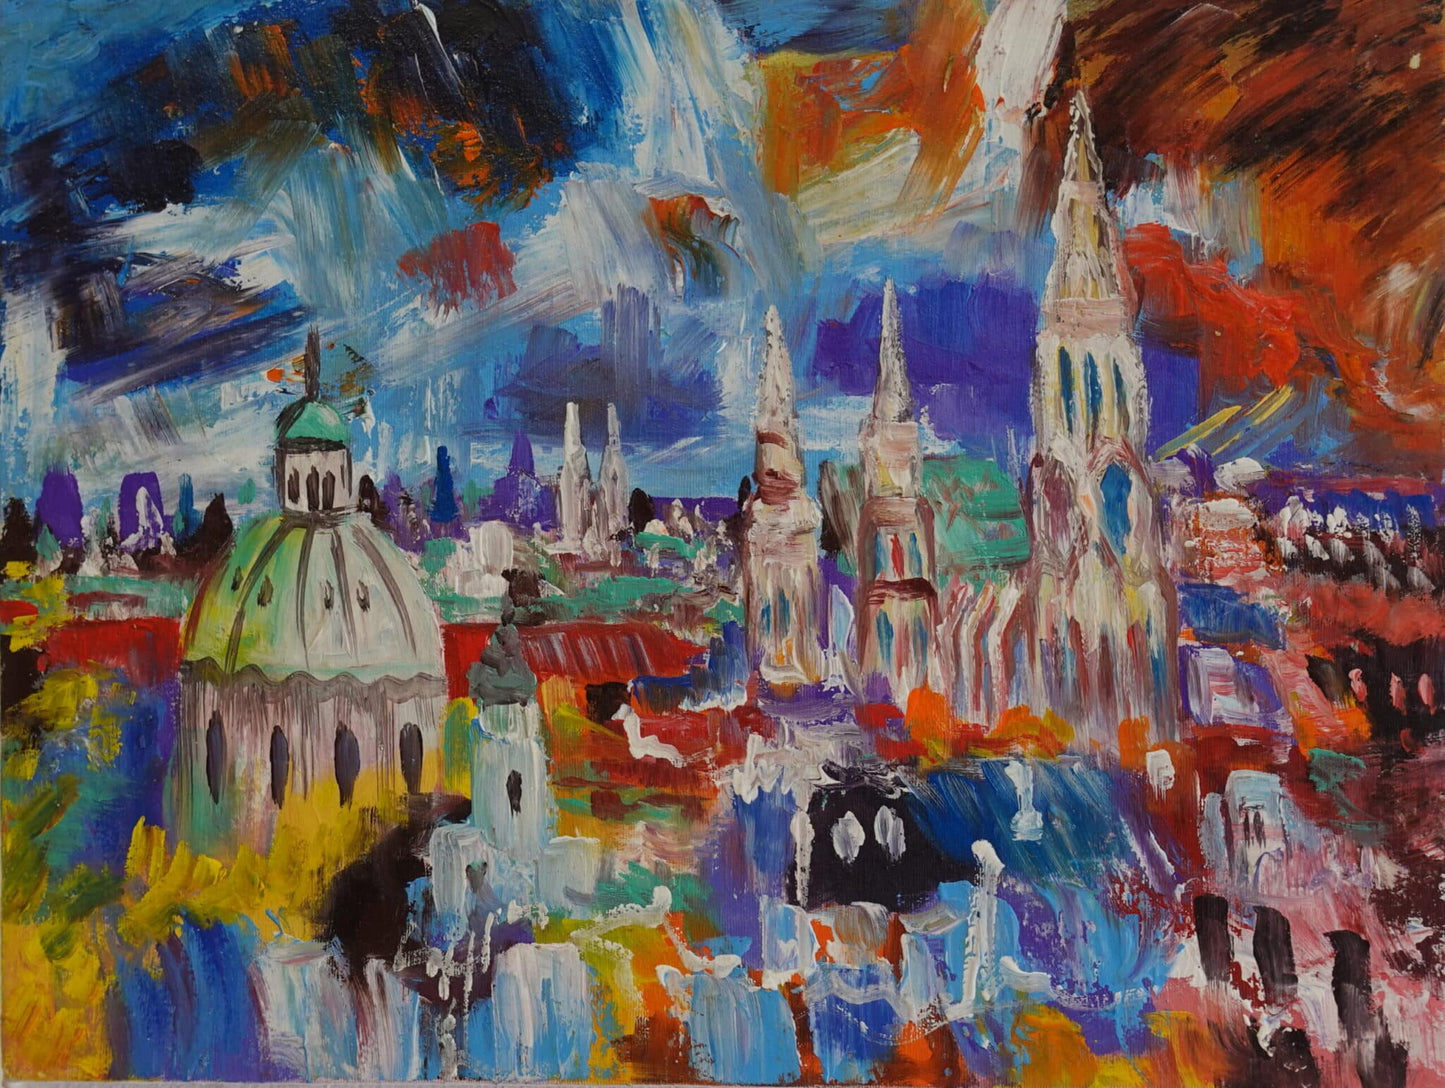 Berlin Abstract Painting 30 x 40 cm